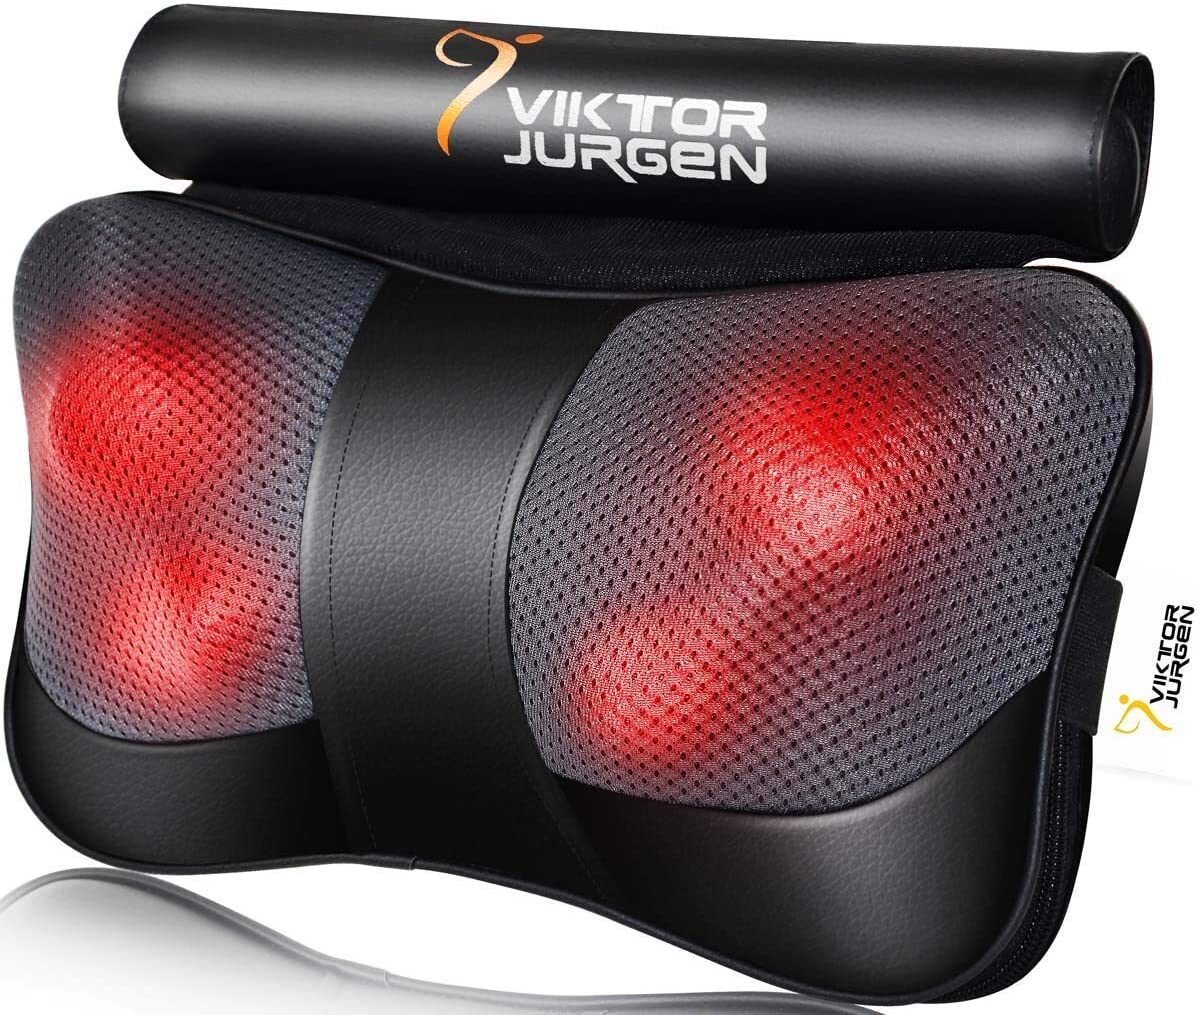 This portable shiatsu massager is on sale